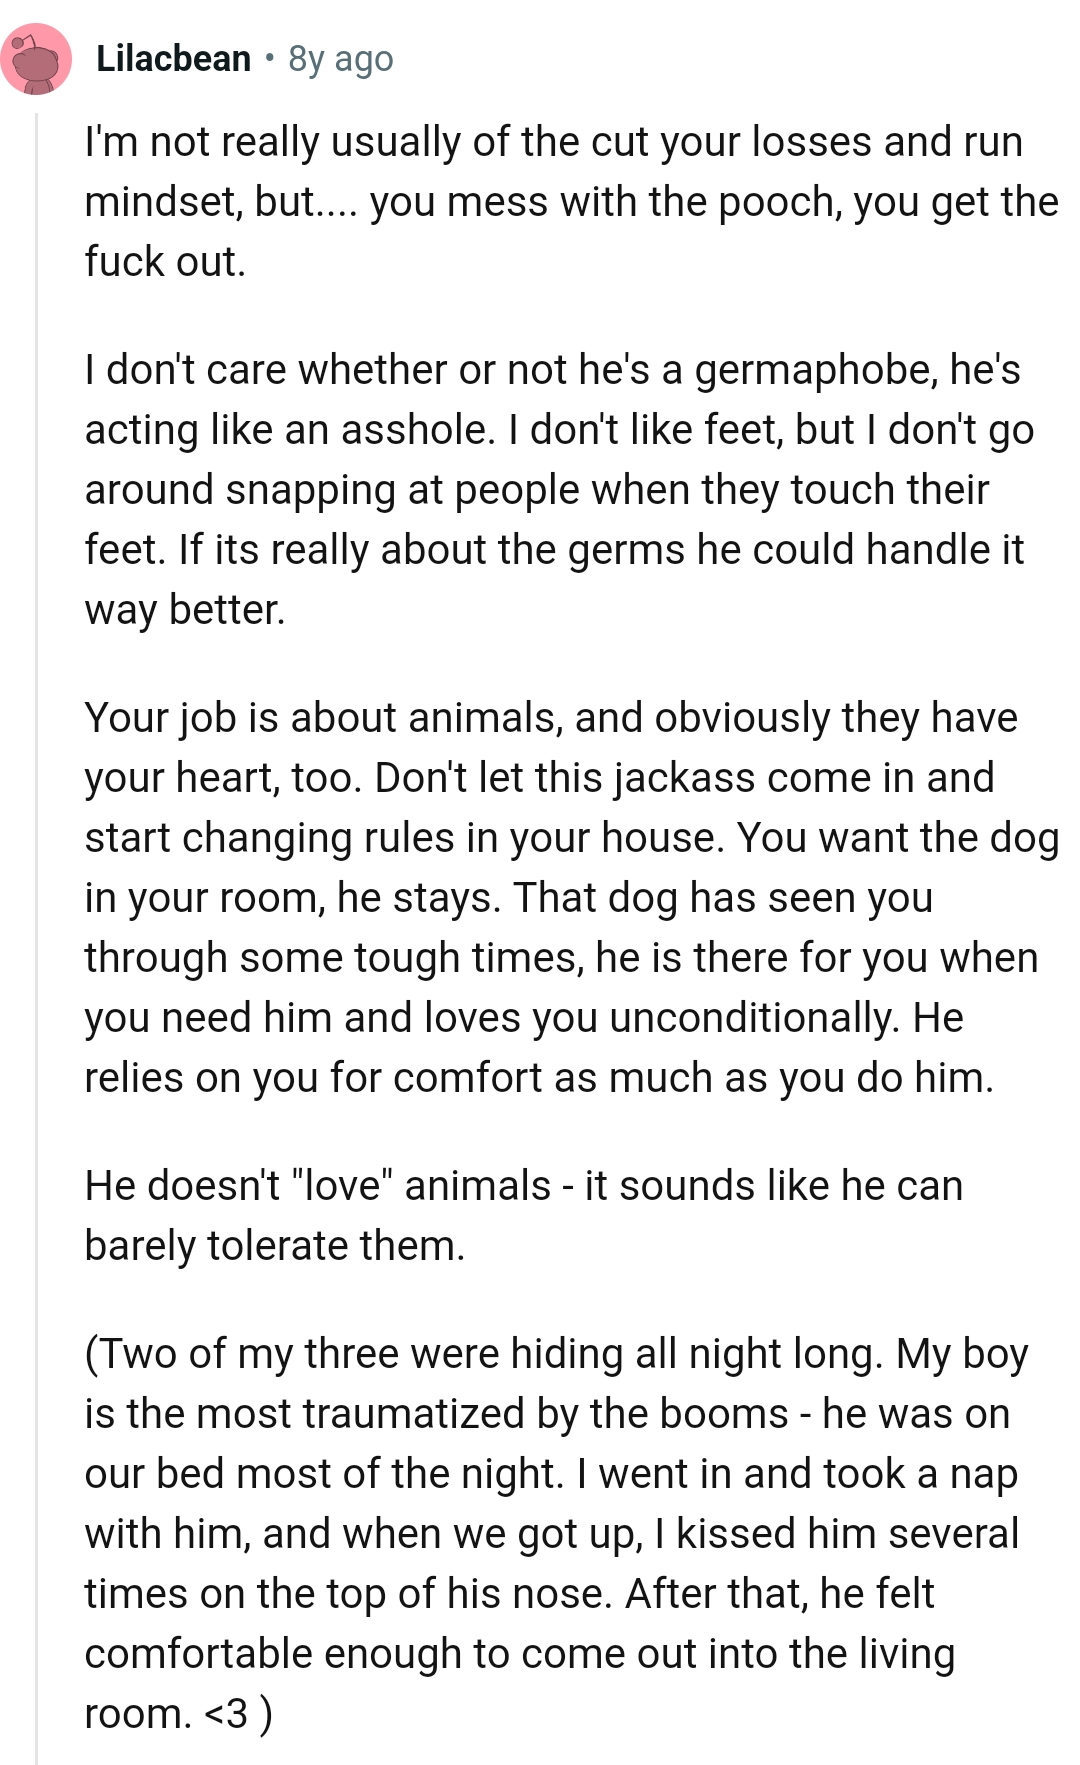 OP's job is about animals